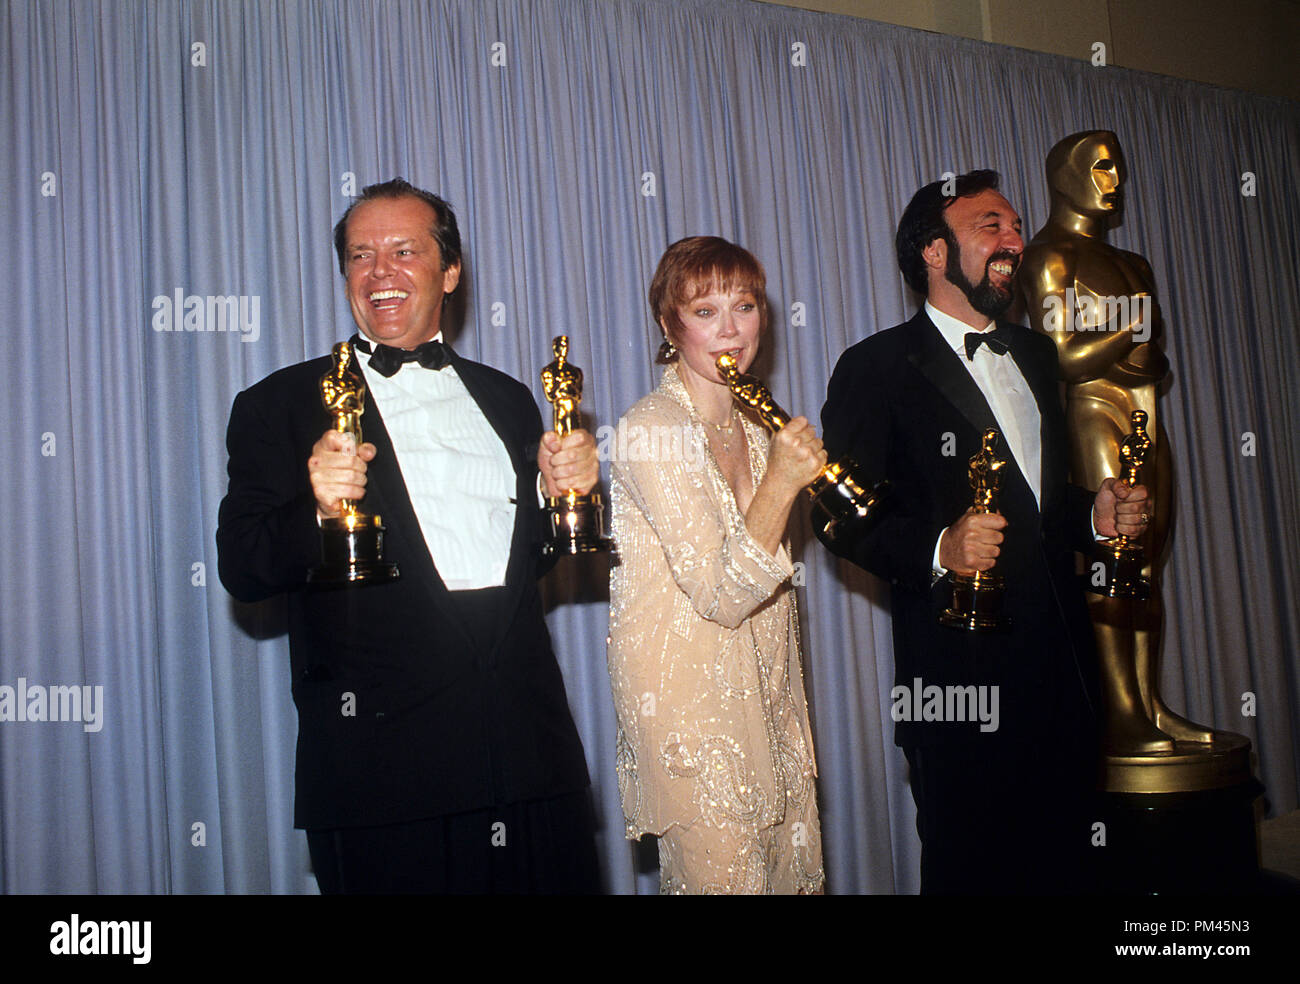 Jack Nicholson, Shirley MacLaine, and James L.  Brooks, Academy Award Winners for 'Terms of Endearment' April 9,1984. File Reference #1038 015THA © JRC /The Hollywood Archive - All Rights Reserved. Stock Photo